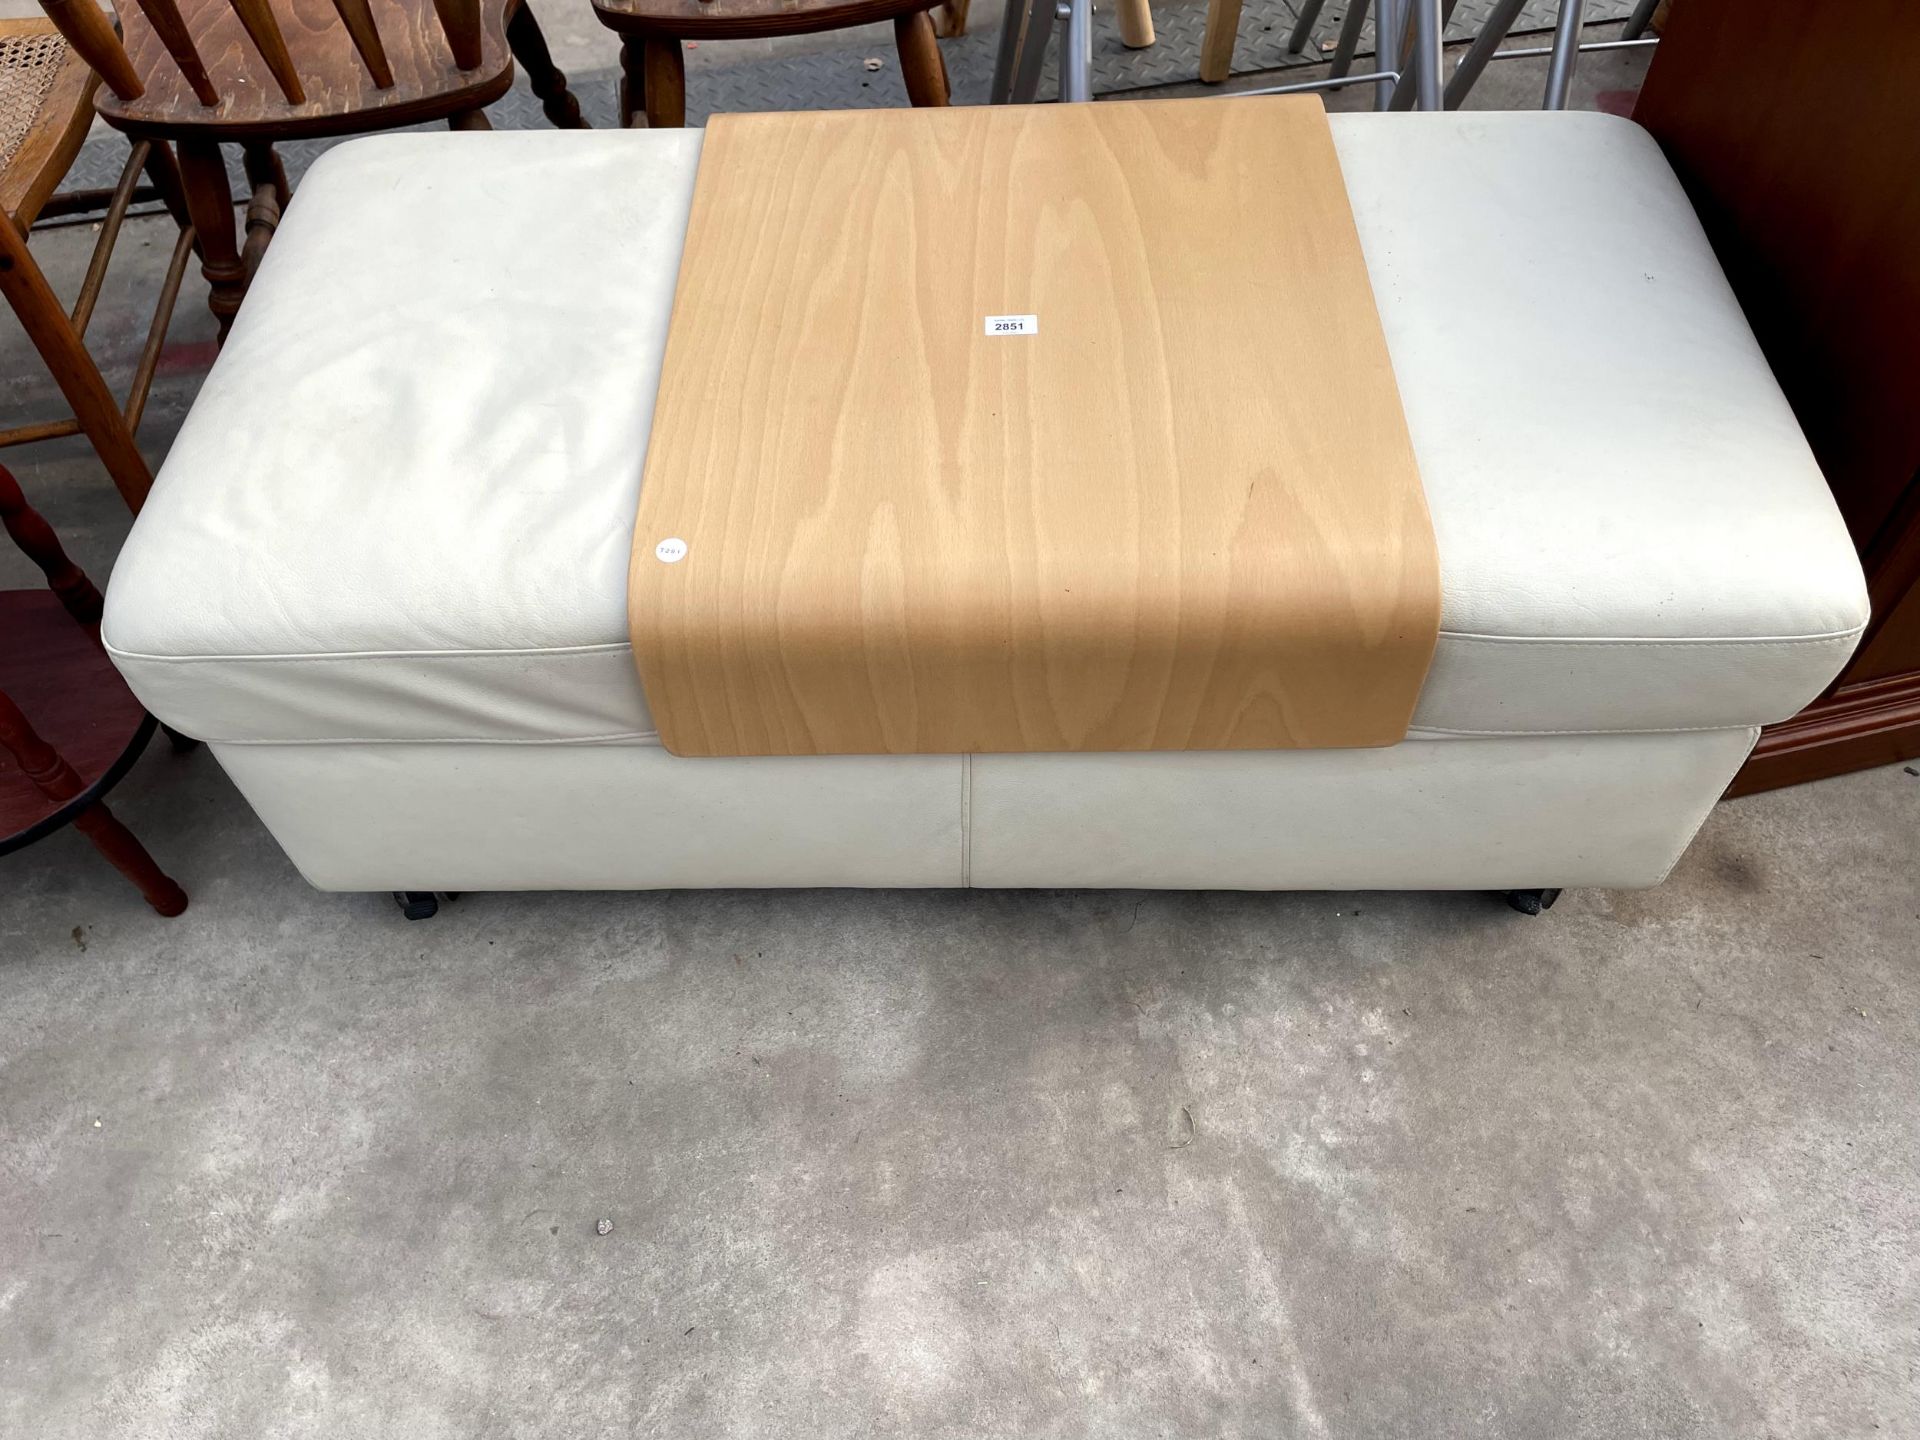 A MODERN WHITE FAUX LEATHER TWO SECTION STOOL/OTTOMAN WITH BENTWOOD REMOVEABLE TOP